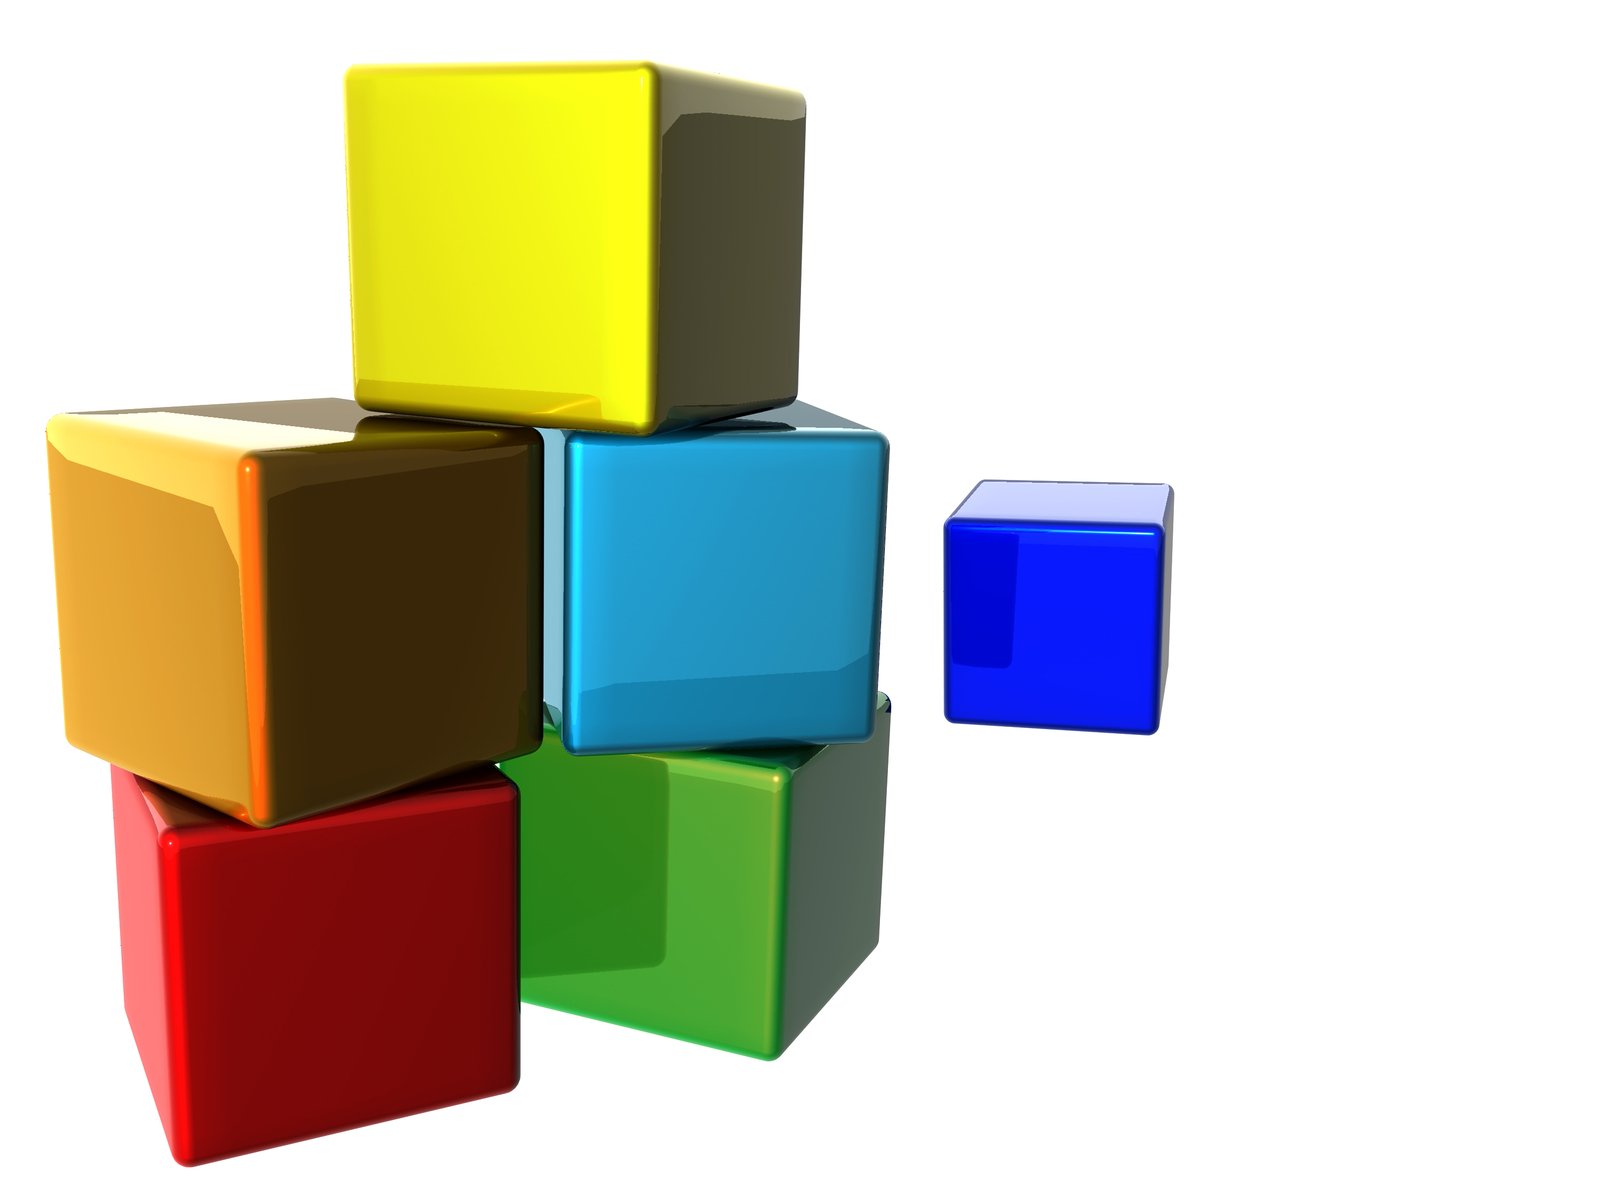 an illustration of the cubes stacked next to each other